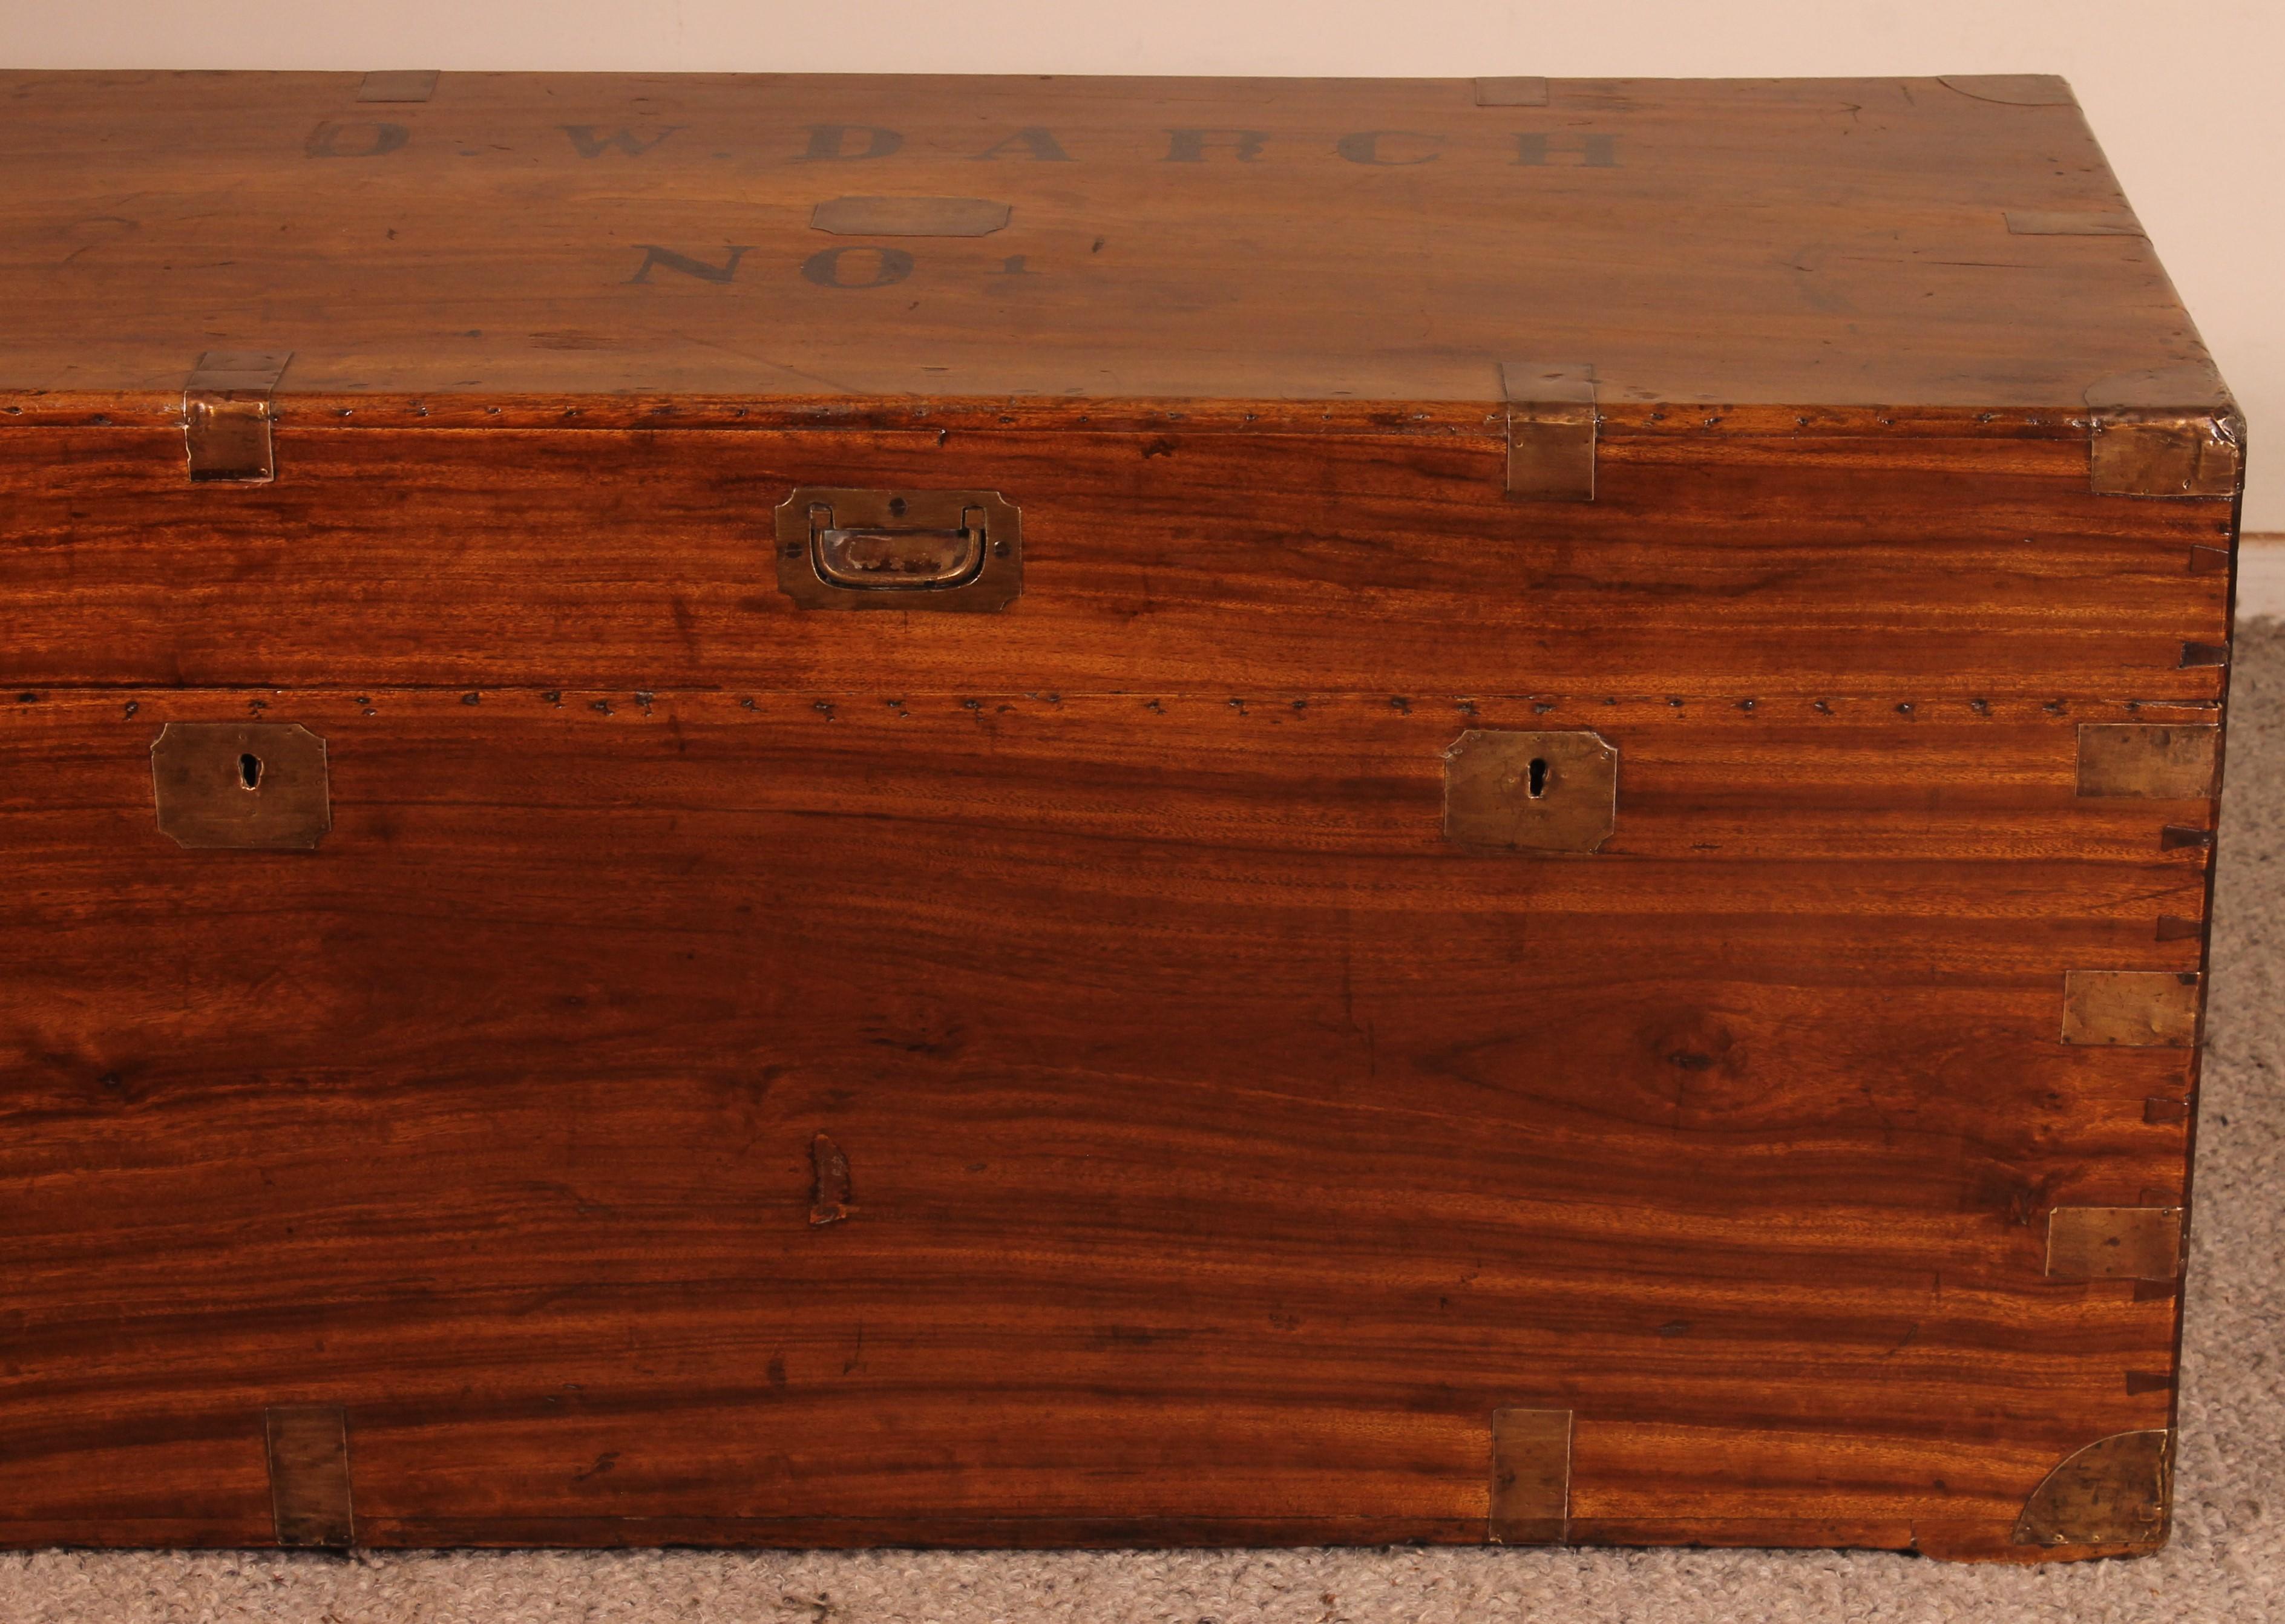 Superb large 19th century campaign chest in camphor wood of Captain OW Darch
Chest of the English navy with its fittings typical of this style of furniture and its carrying handles on the side

large model with the name of the captain, which is